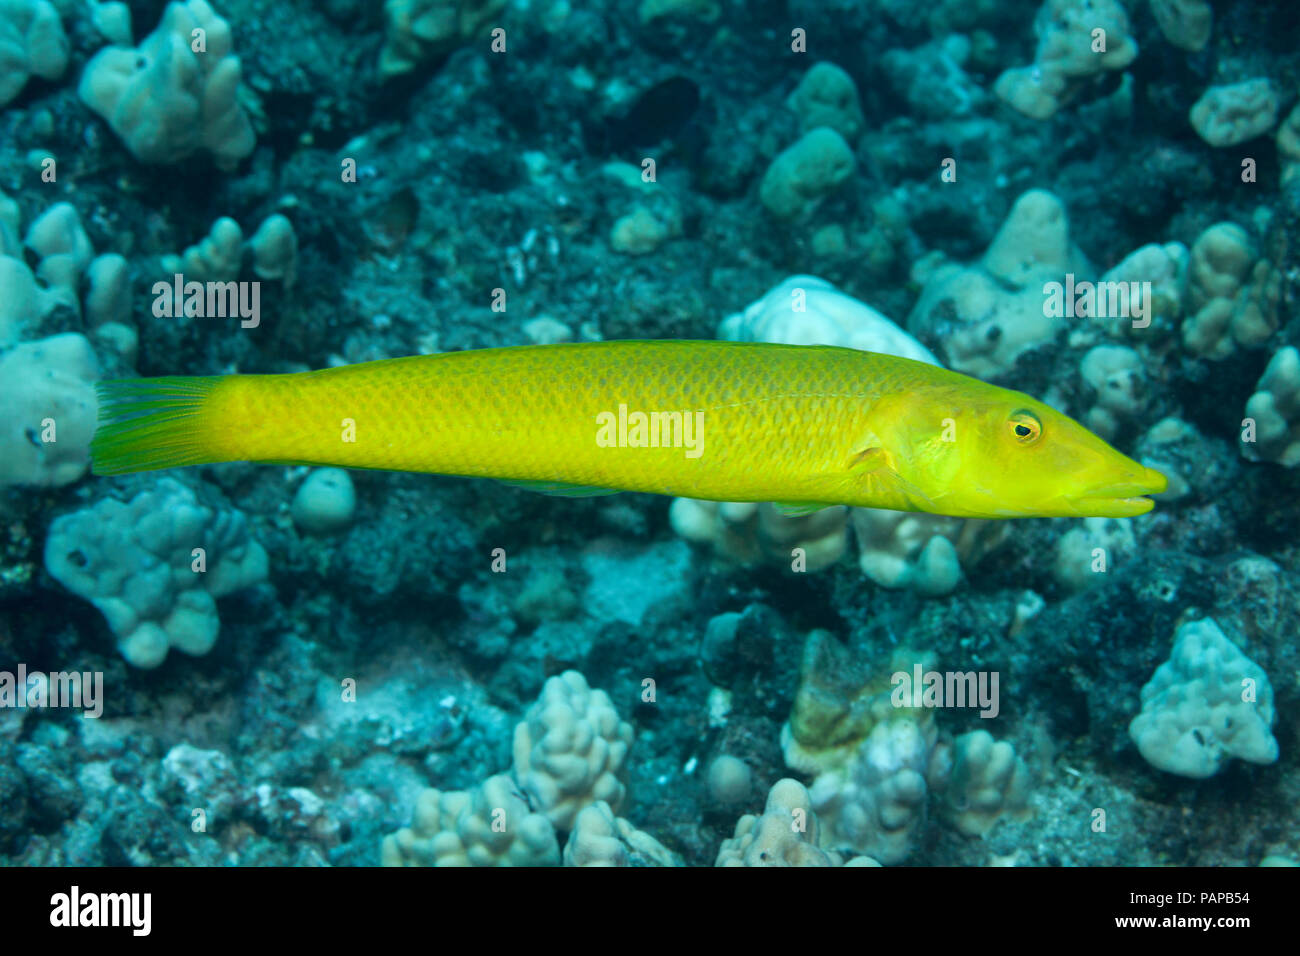 In the wrasse family, the cigar wrasse, Cheilio inermis, is unique and the only species in this genus. The yellow coloration is also less common, Hawa Stock Photo